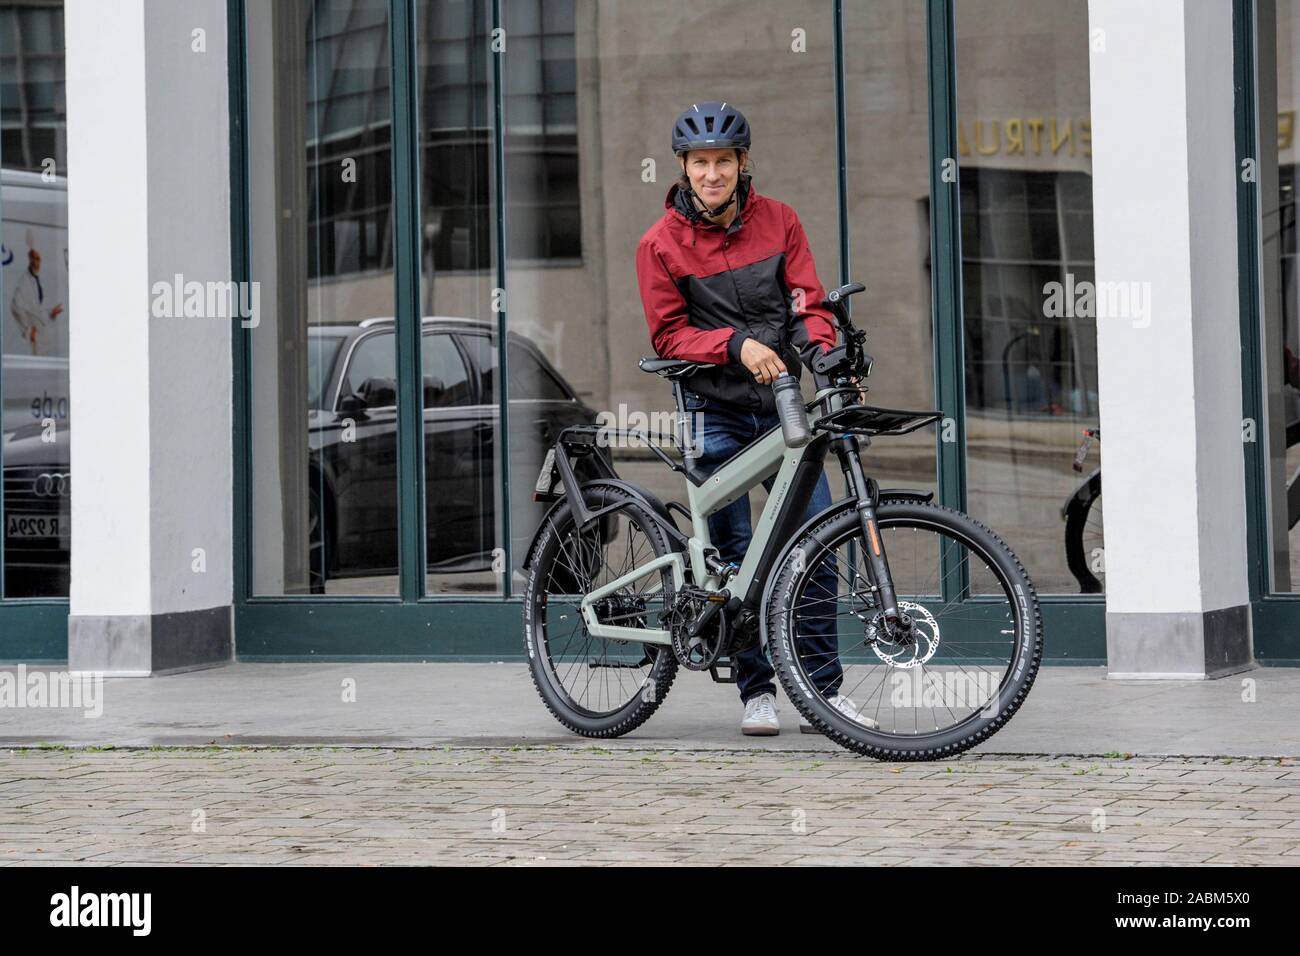 The high-end E-Bike Superdelite GT Rohloff HS of the manufacturer Riese und Müller with two batteries, which offers a motor support up to a maximum of 45 kilometers per hour. pressedienst-fahrrad GmbH presented the 'Bicycle Trends for 2020' at the Verkehrszentrum Deutsches Museum. [automated translation] Stock Photo